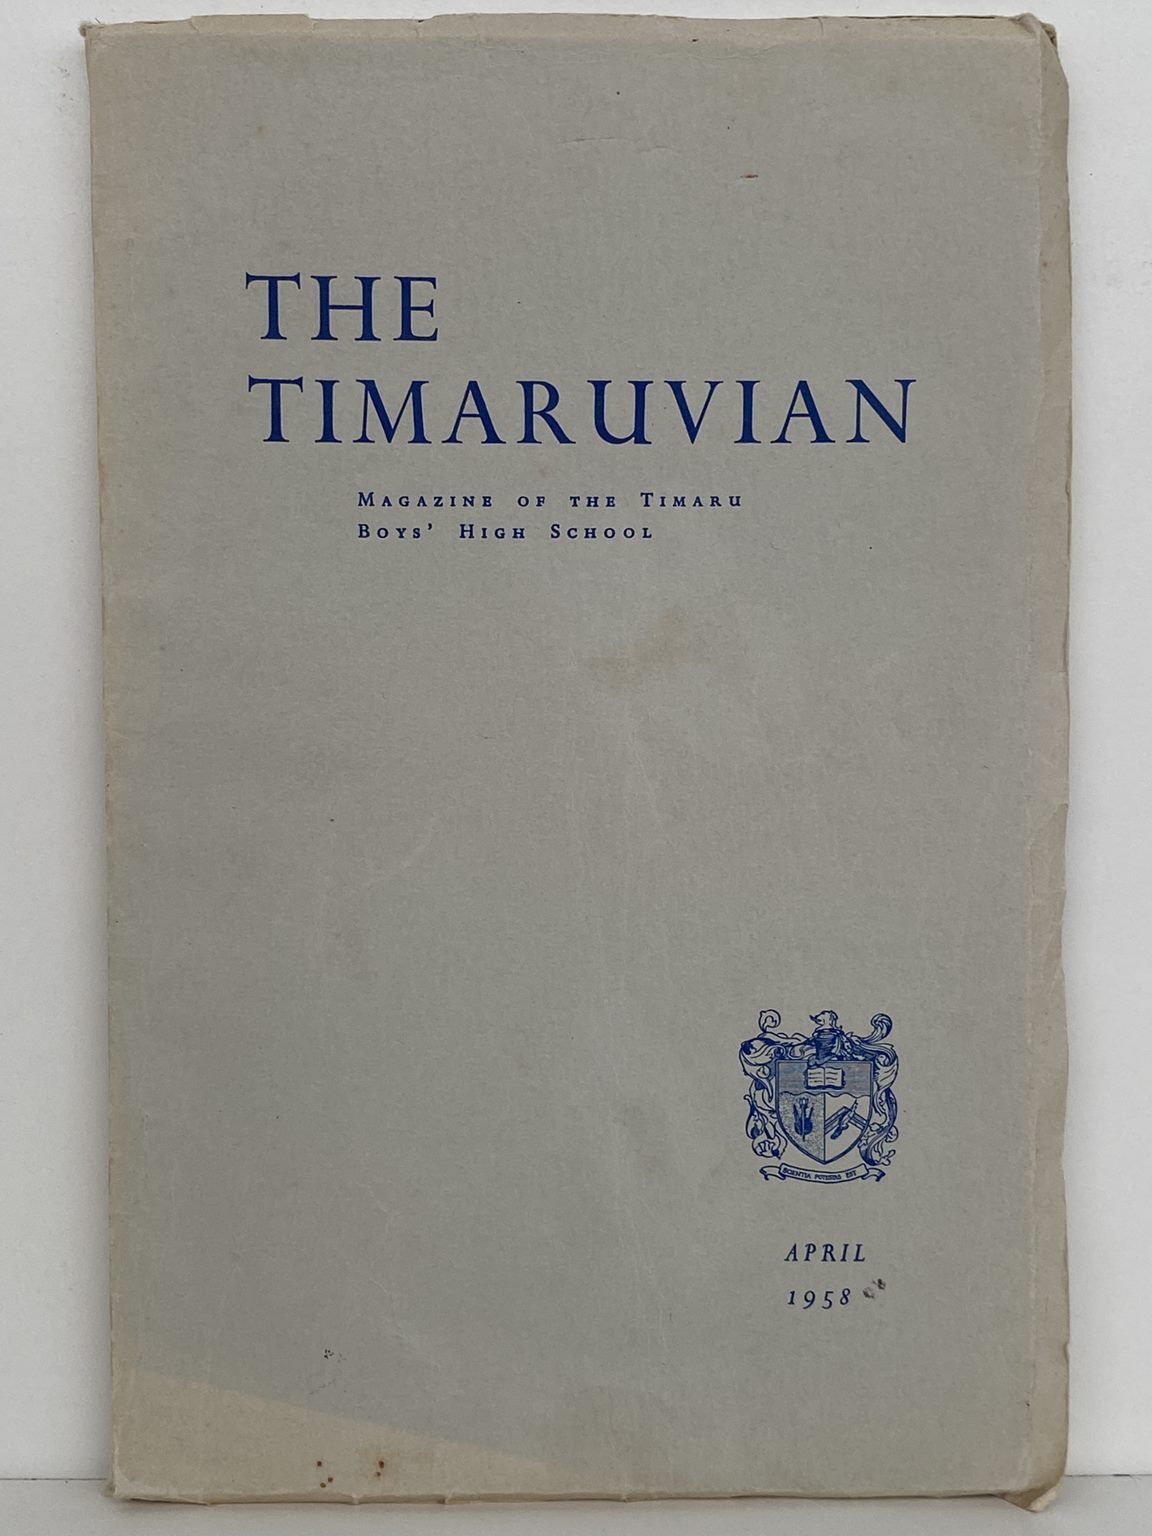 THE TIMARUVIAN: Magazine of the Timaru Boys' High School and its Old Boys' Association 1958